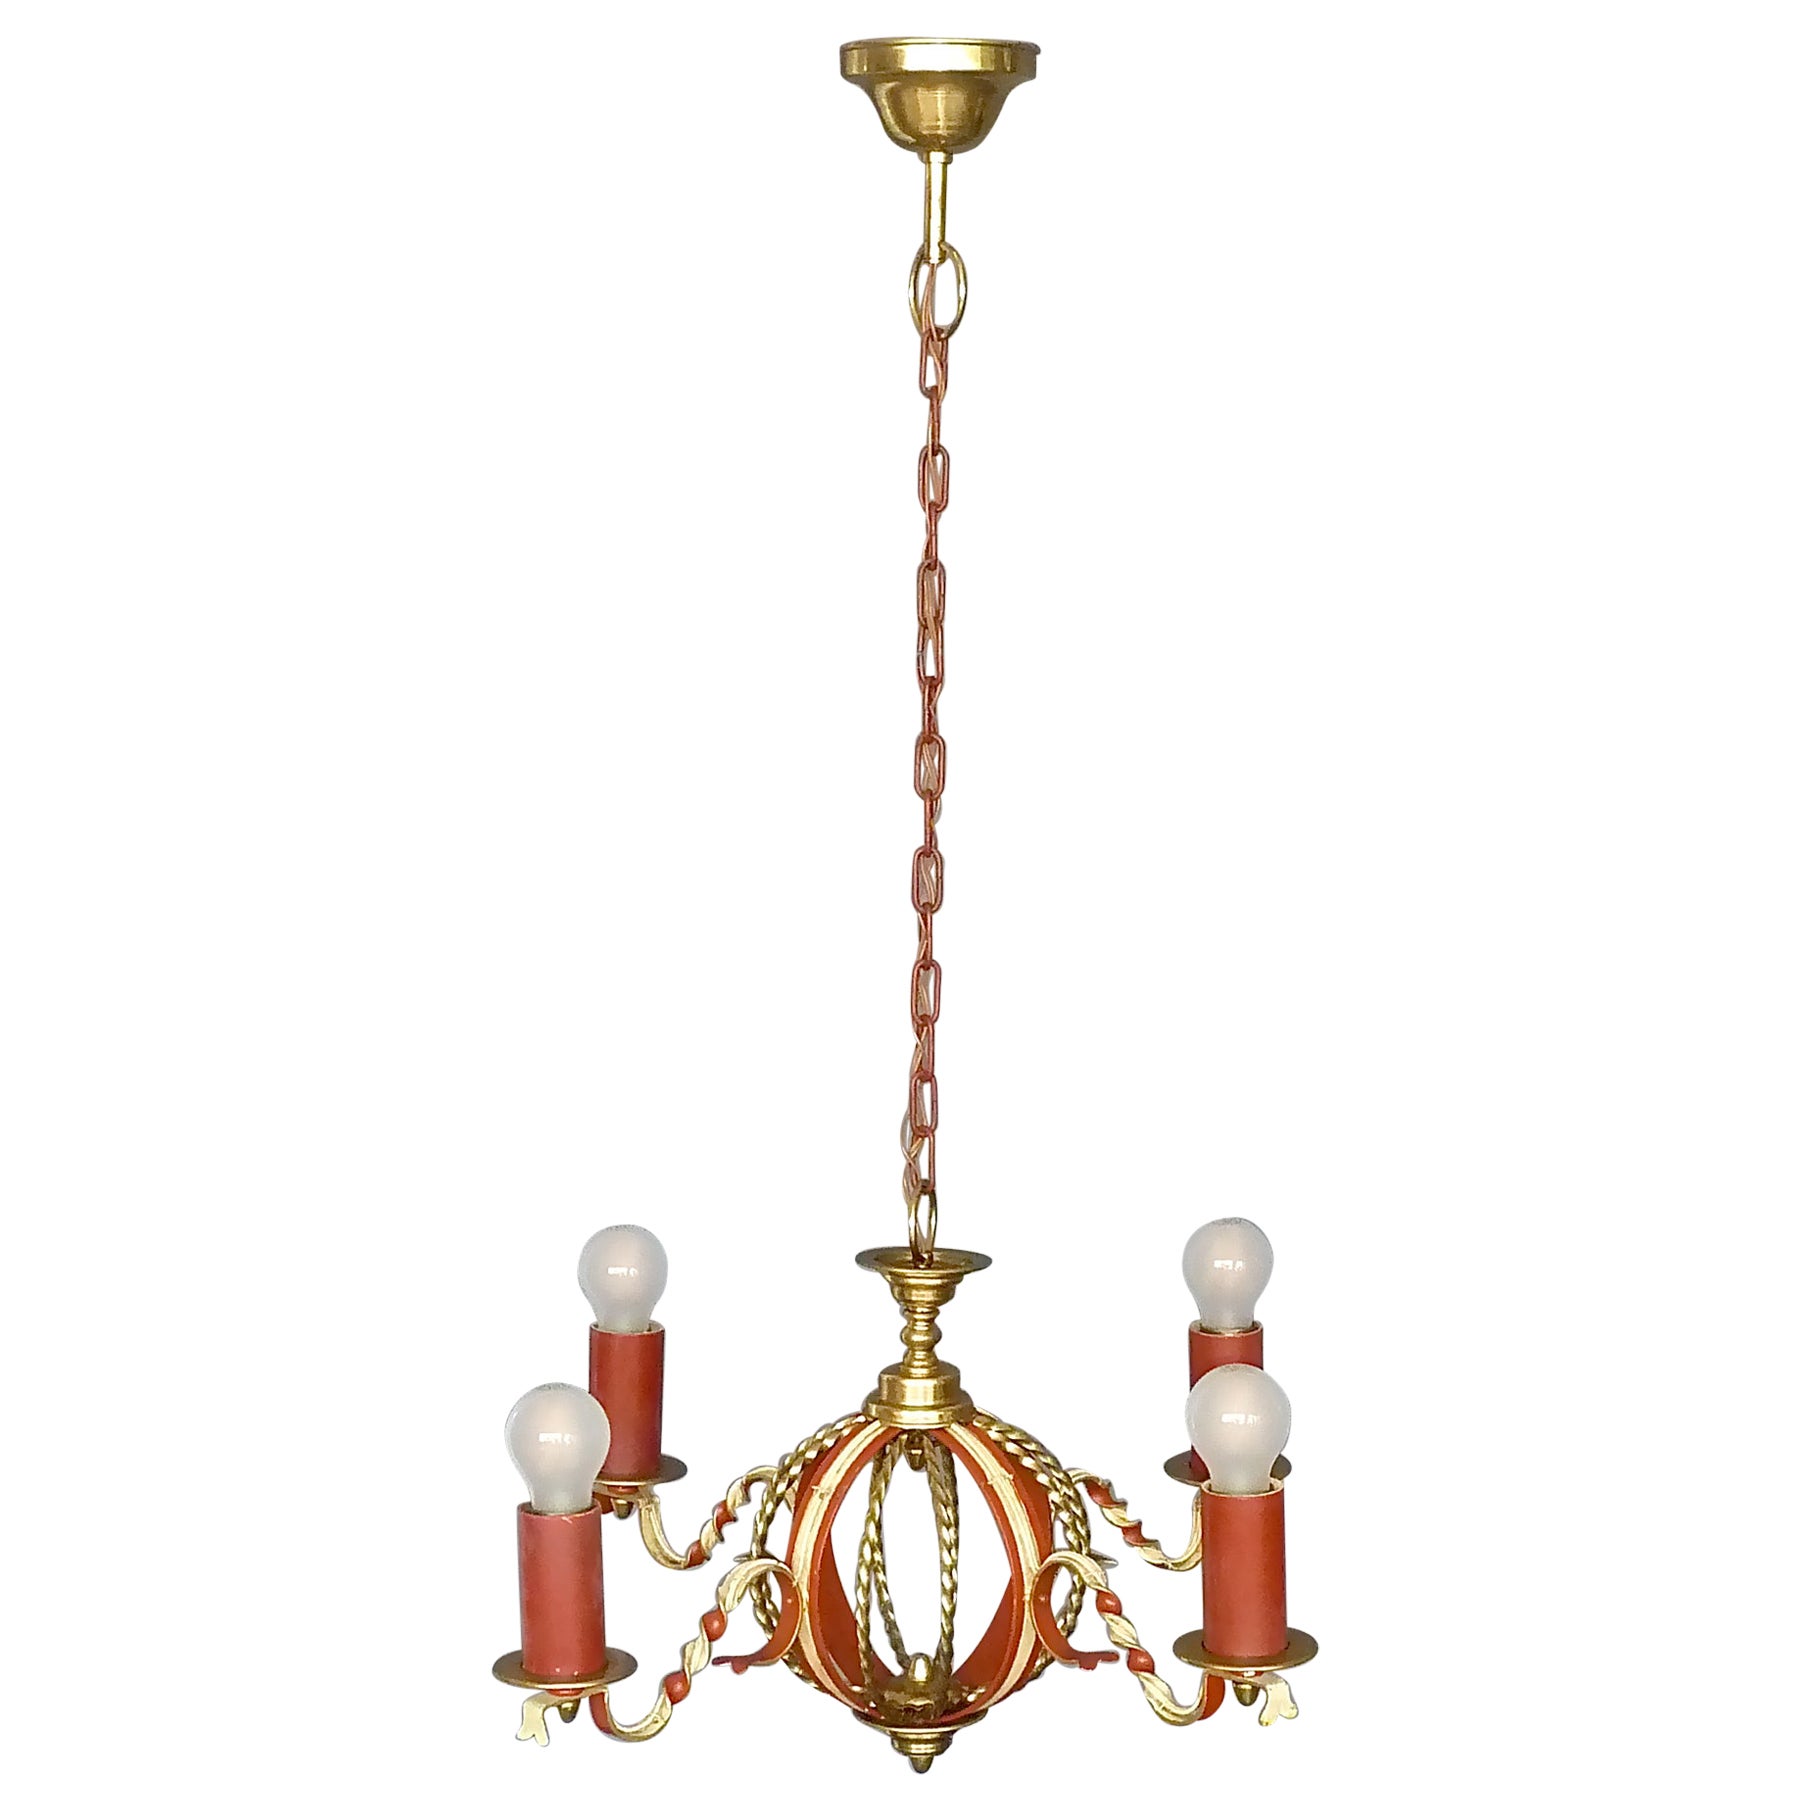 Large French Poillerat Style Globe Chandelier Wrought Iron Brass 1950s no.1 of 2 For Sale